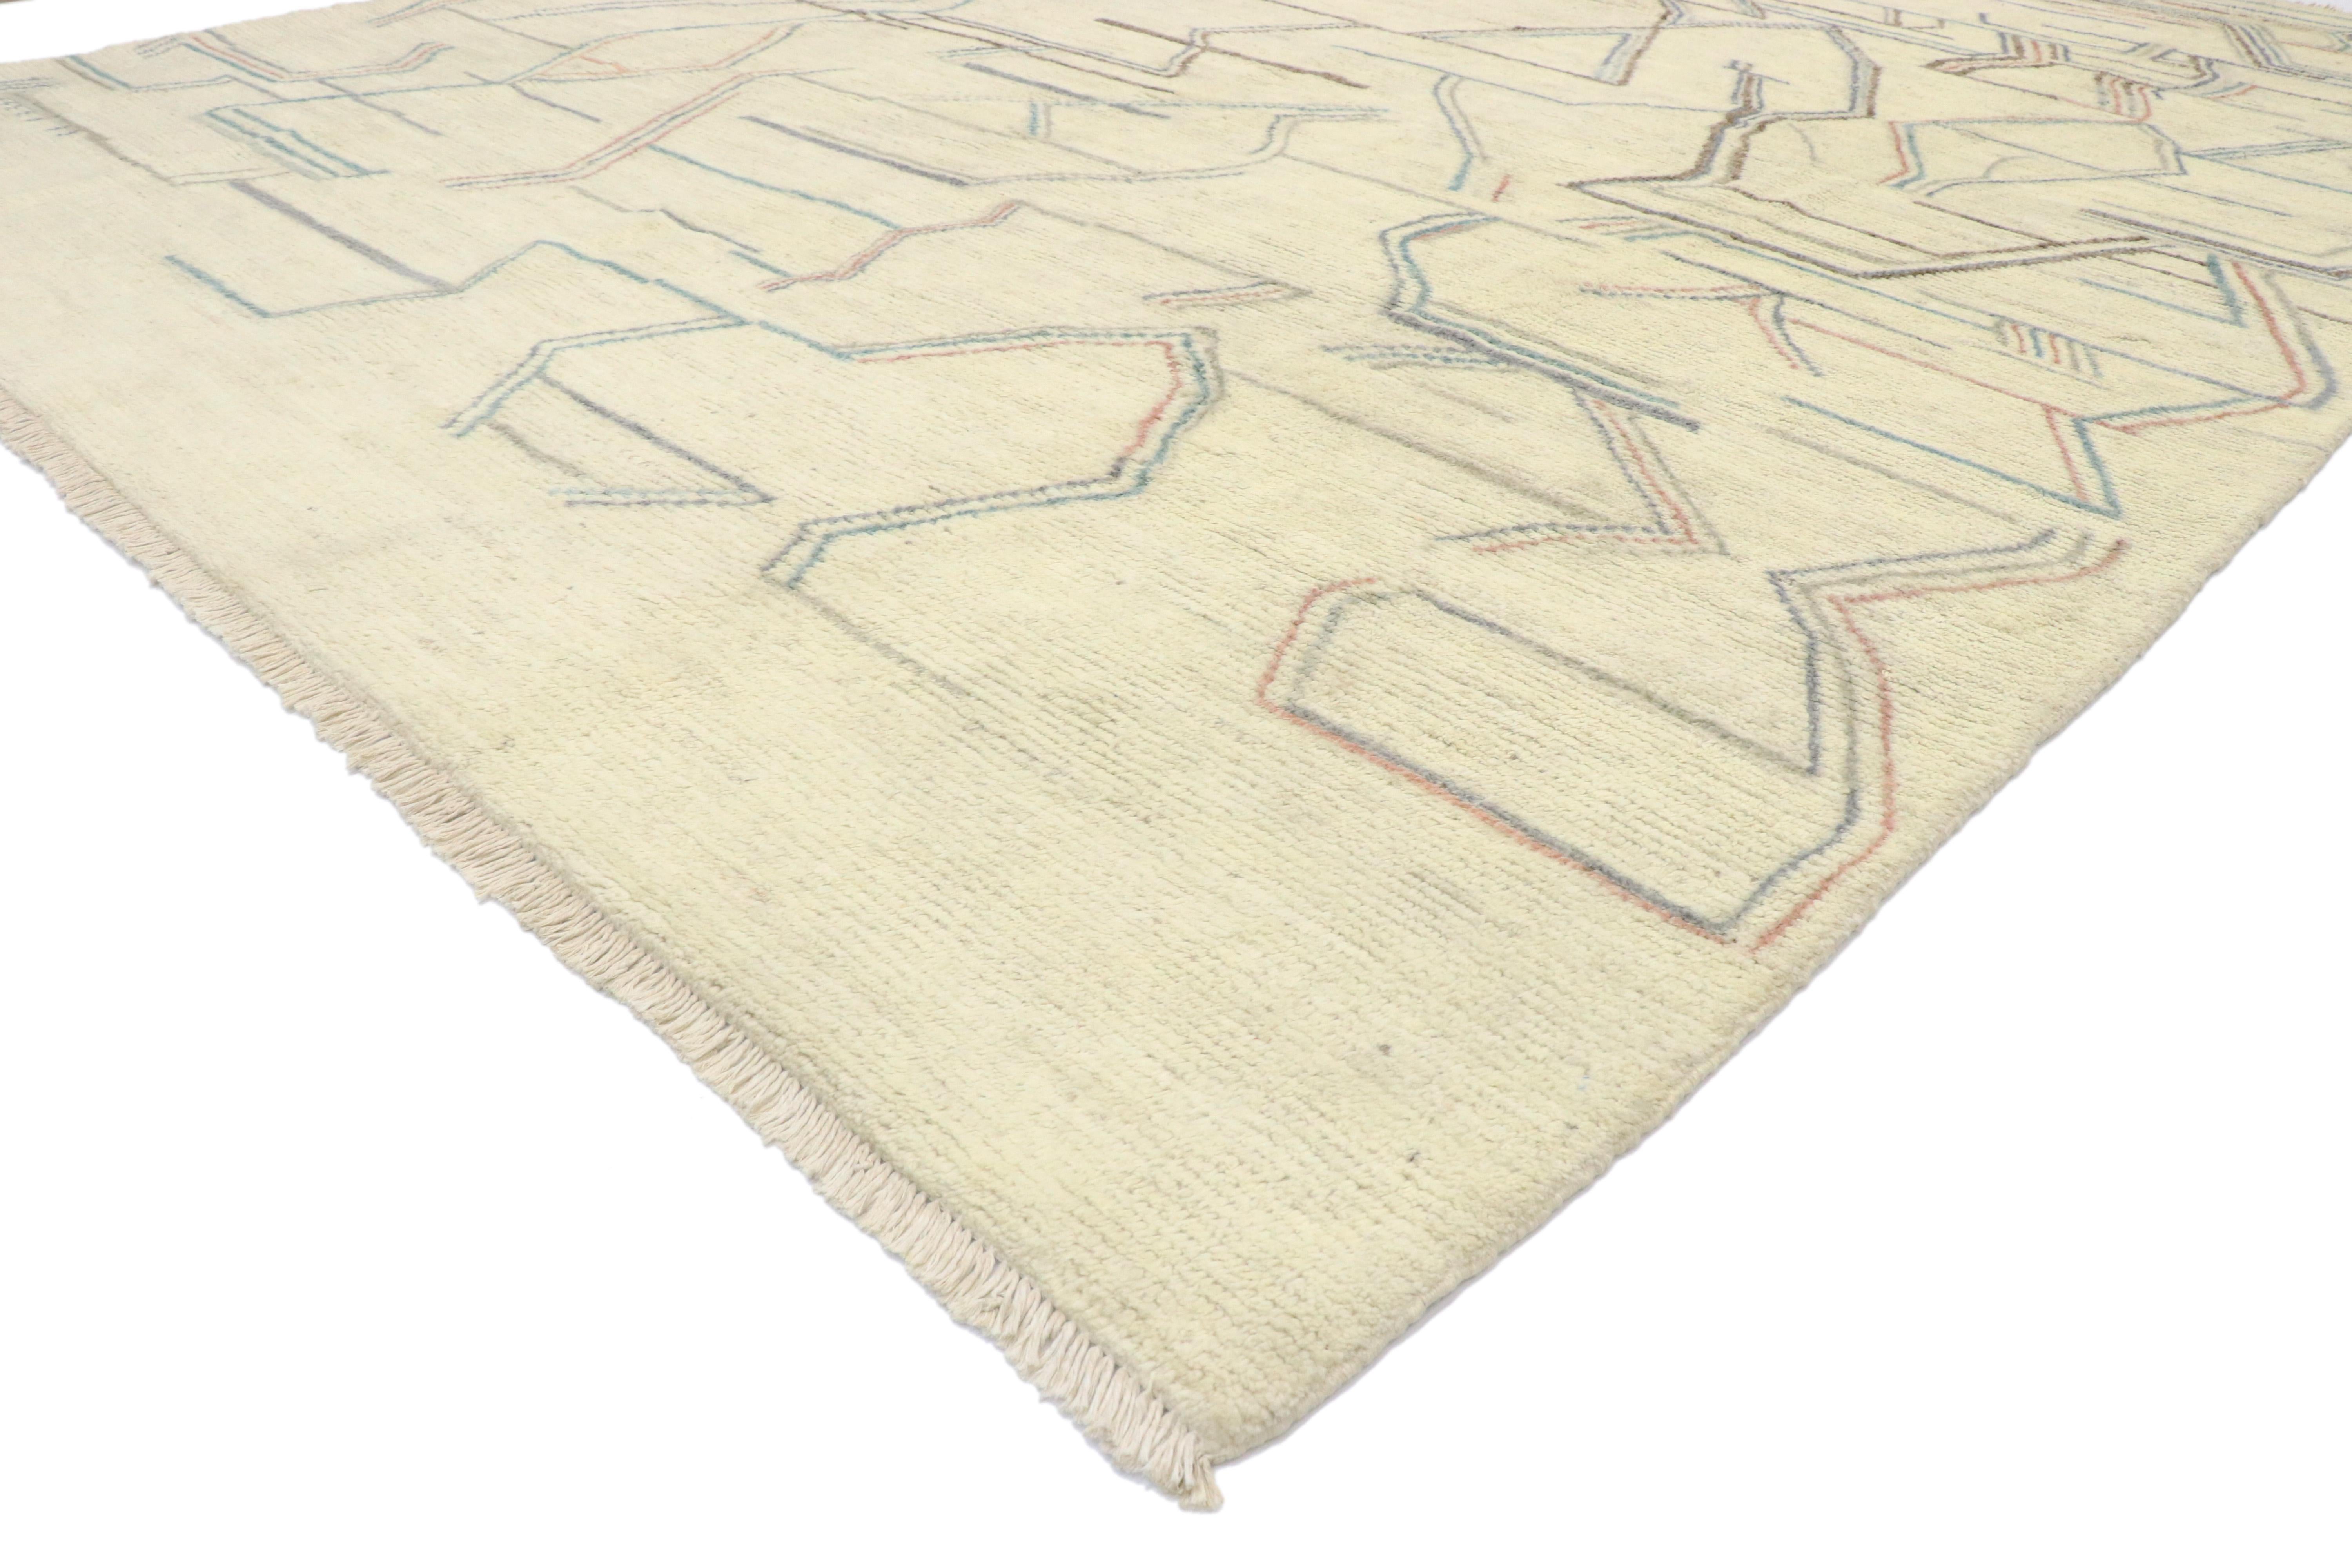 80287, new contemporary Moroccan style Area rug with Geometric Abstract Art Design from Esmaili Rugs collection. This hand knotted wool new contemporary Moroccan style rug features an all-over expressive geometric comprised of abstract lines